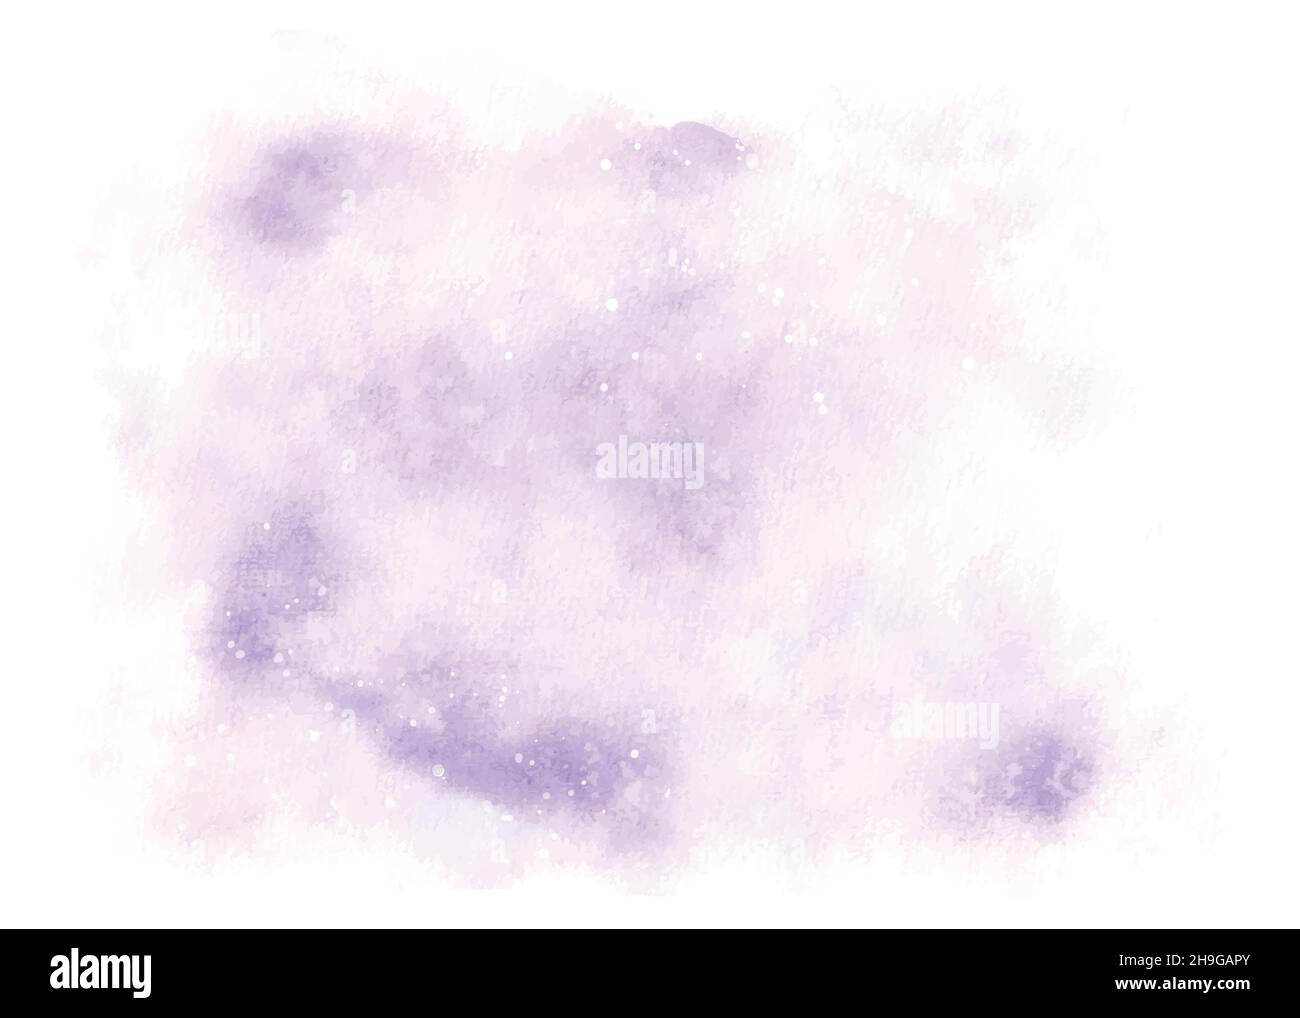 Abstract light purple watercolor for background. Stains artistic vector used as being an element in the decorative background design of header, brochu Stock Vector